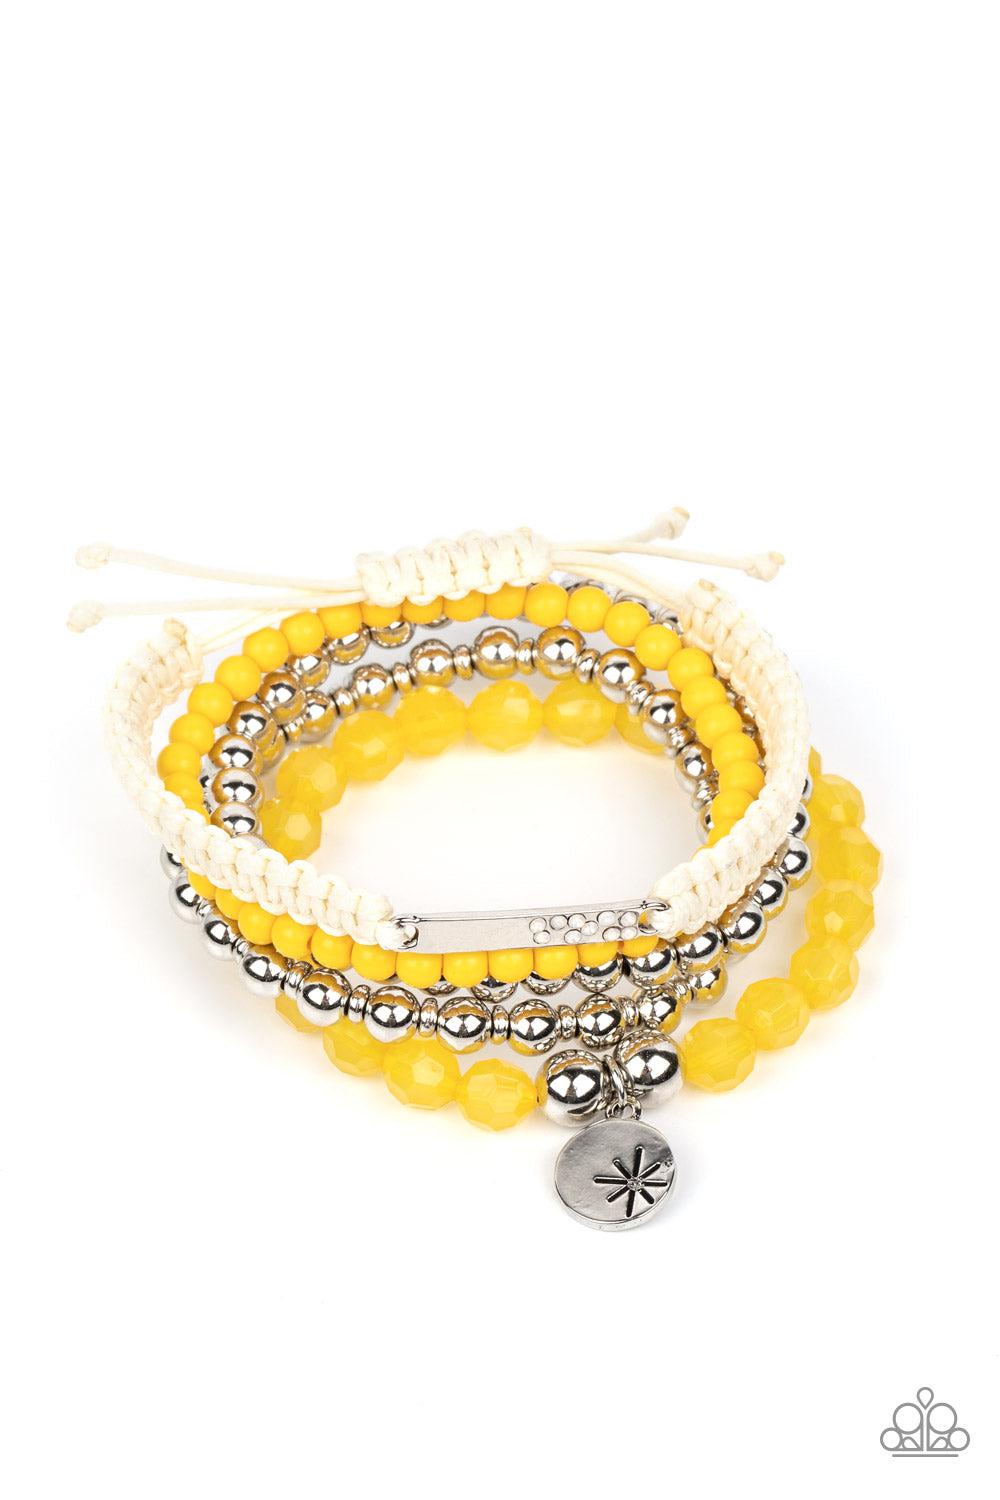 Offshore Outing Yellow & Silver Bracelet Set - Paparazzi Accessories- lightbox - CarasShop.com - $5 Jewelry by Cara Jewels